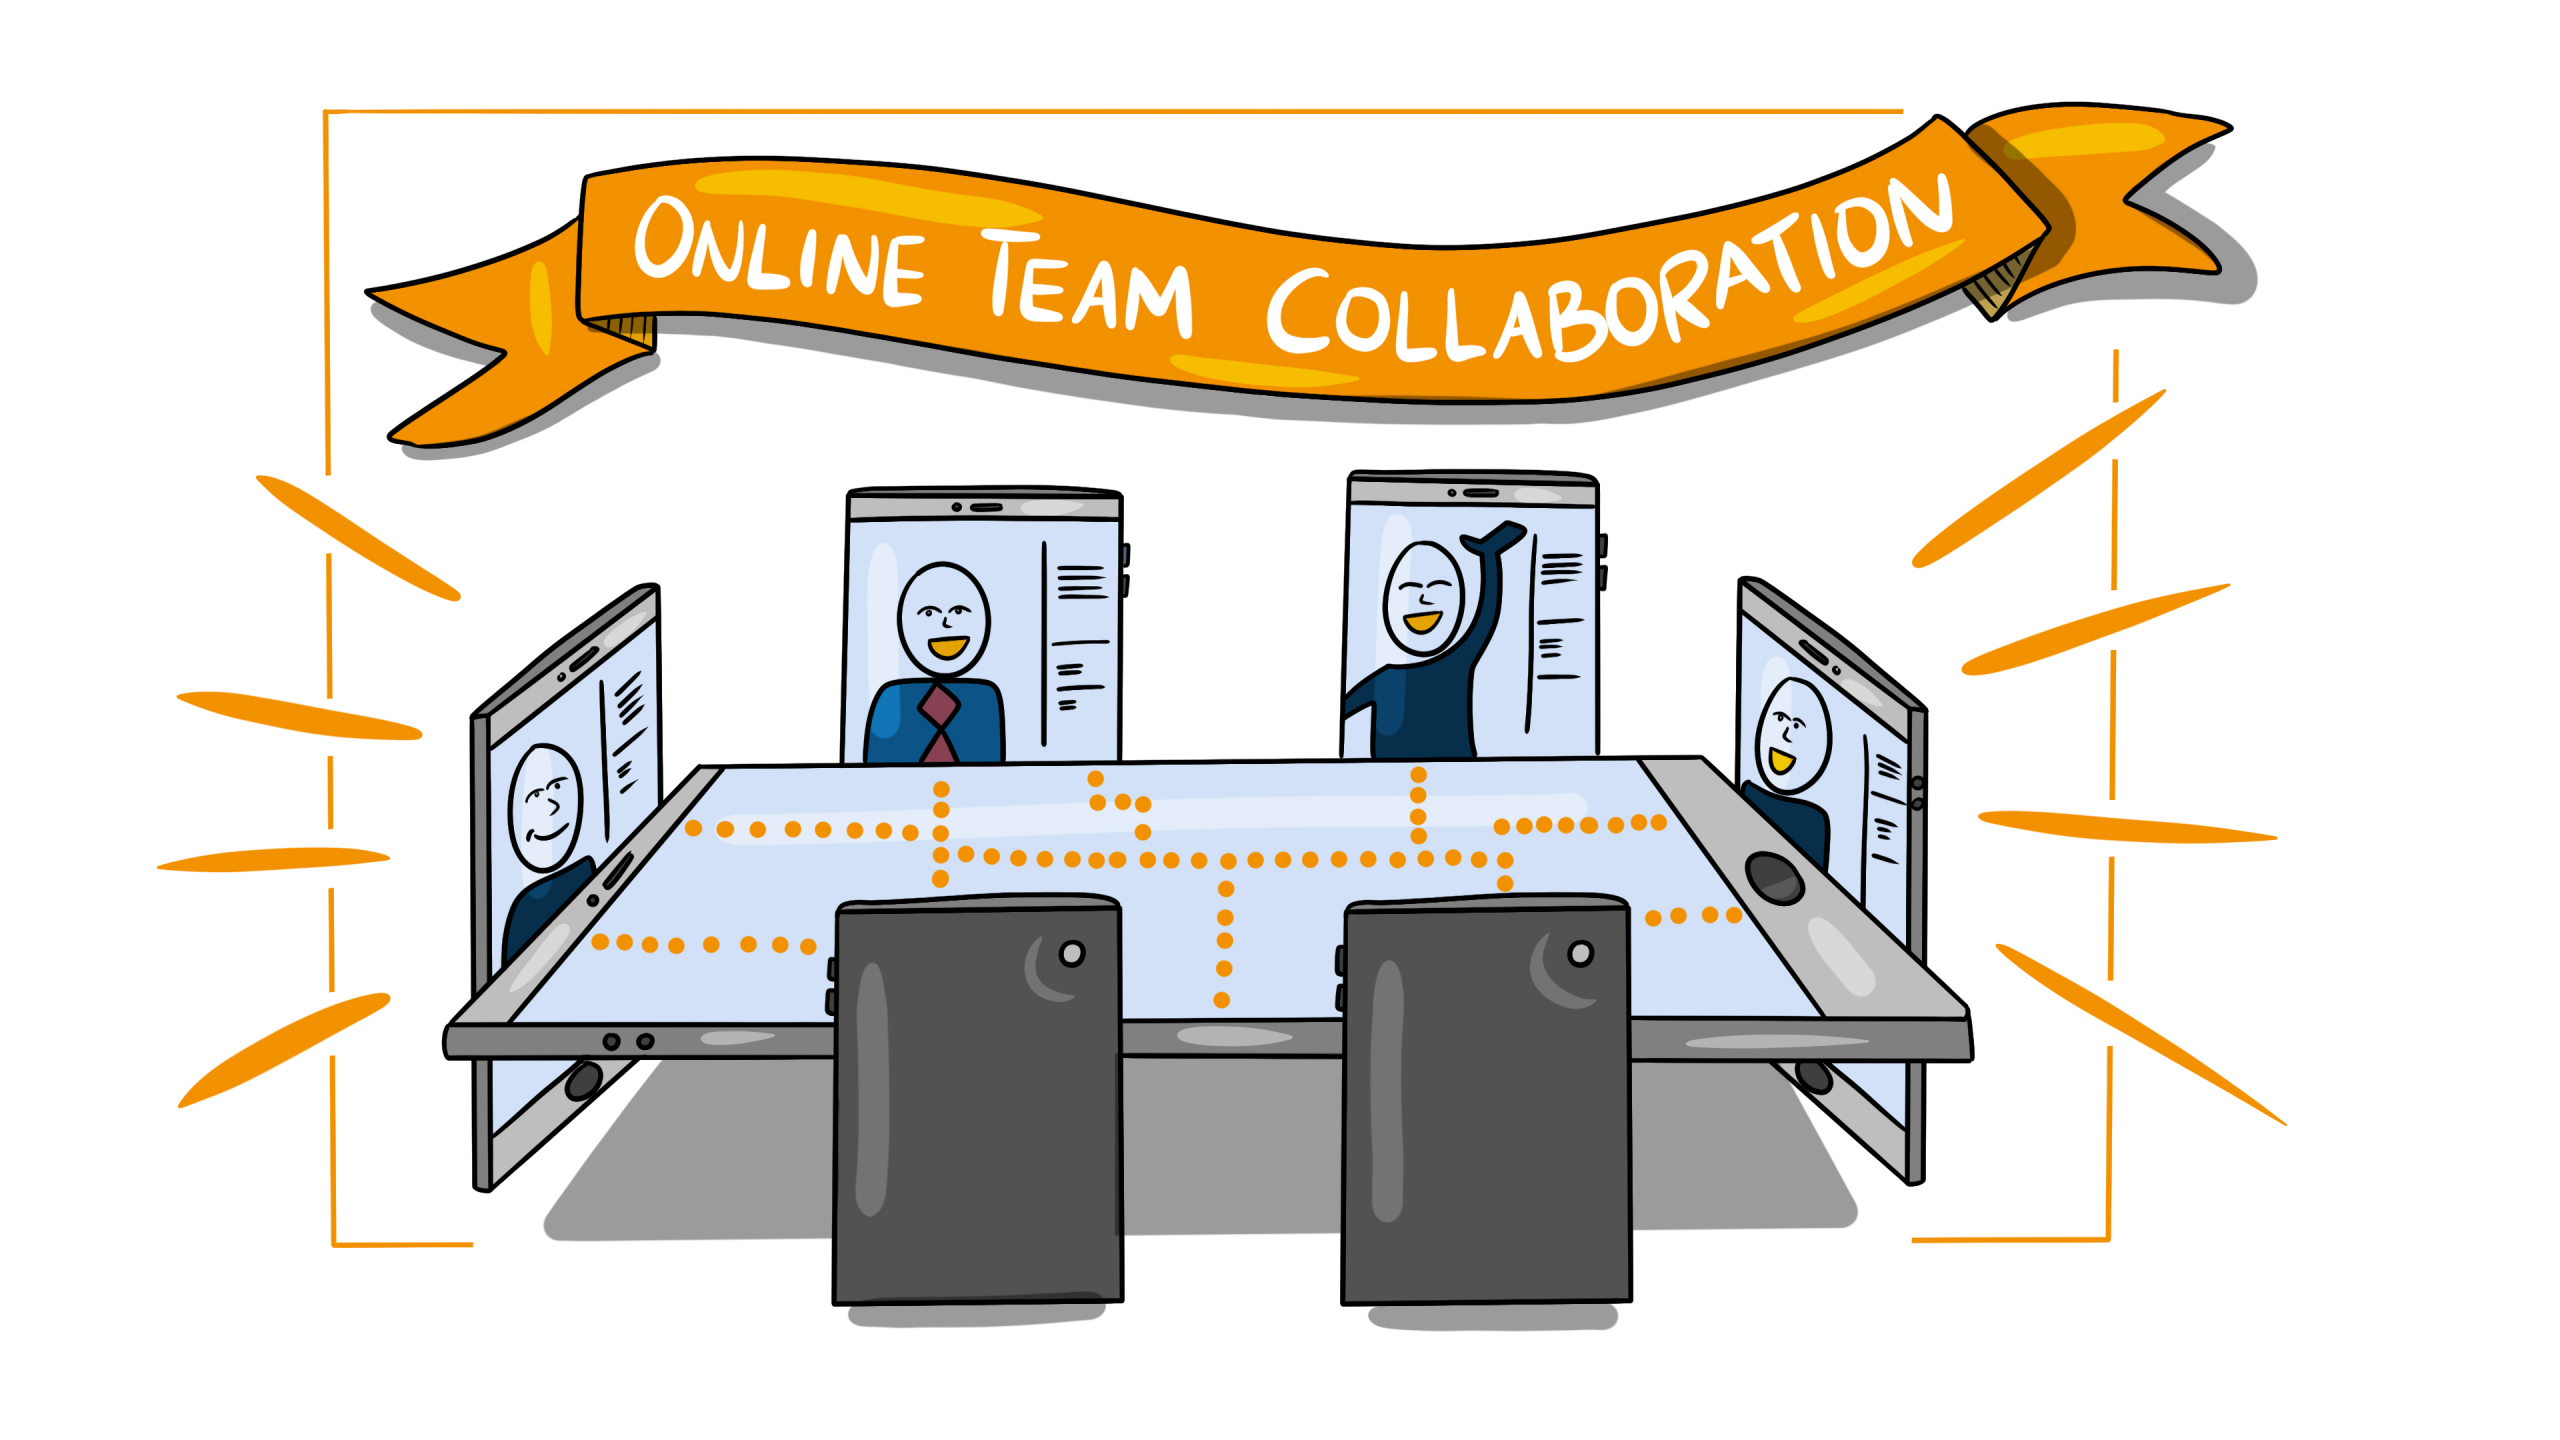 Online Team Collaboration visualized